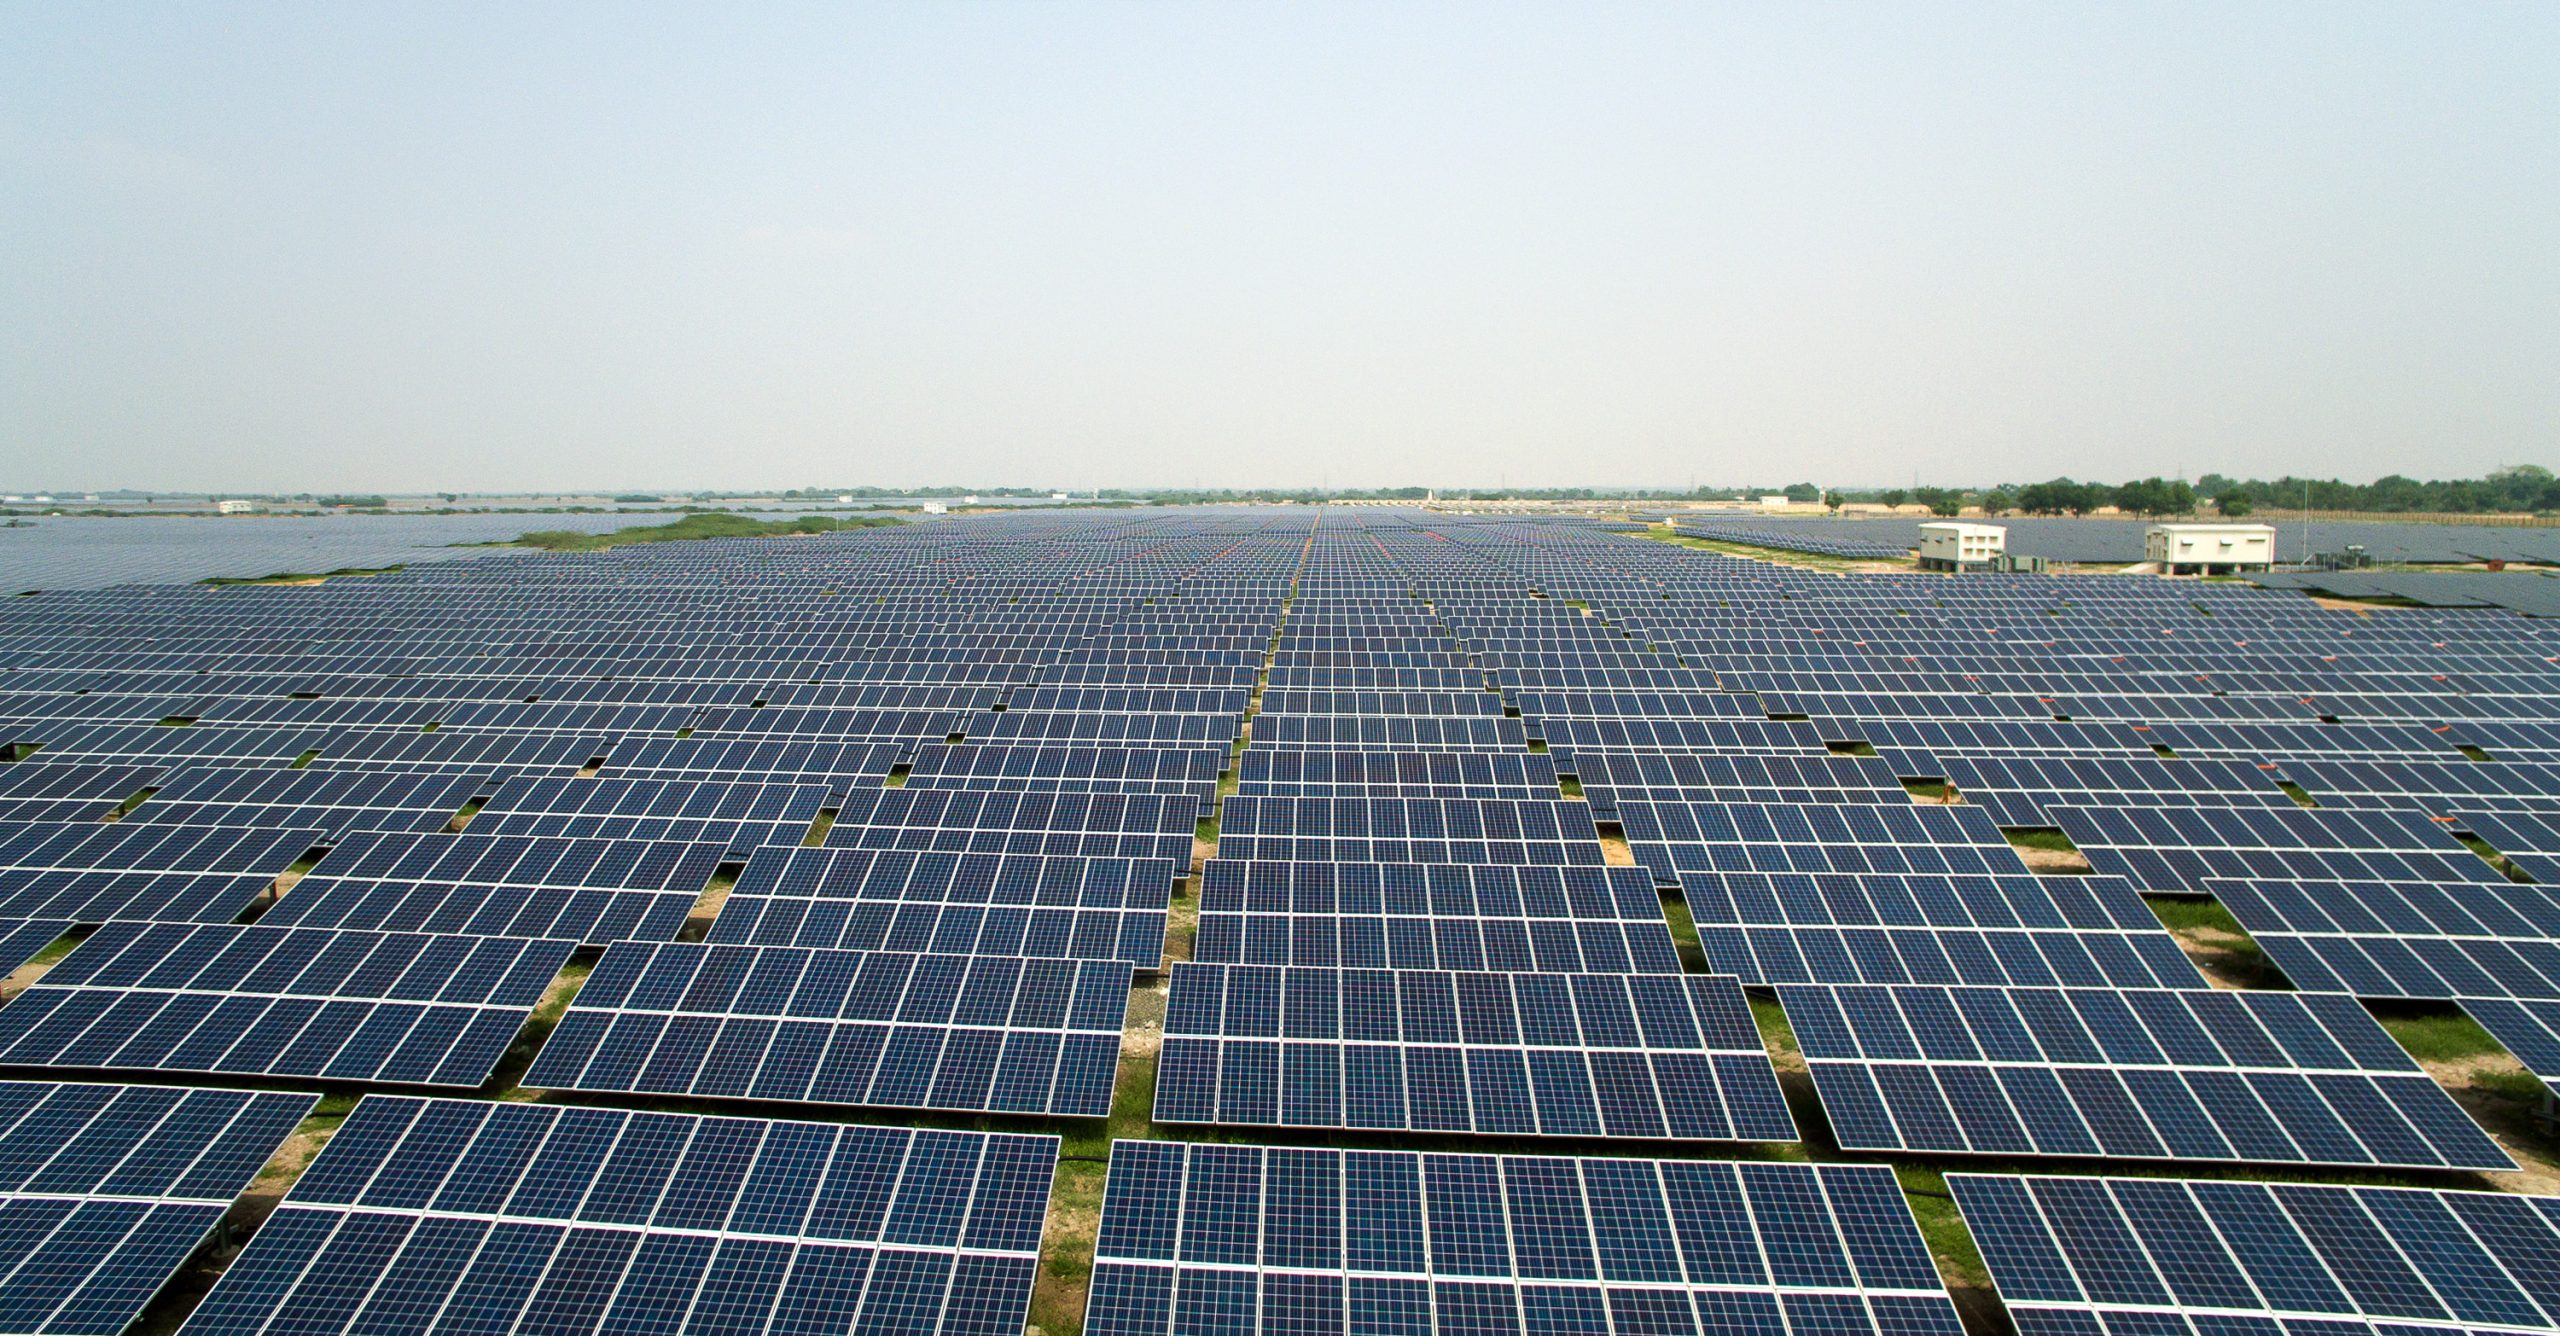 One of the world's largest single location solar farms, it covers 2,500 acres and produces 648 MW at Kamuthi in Tamil Nadu, India